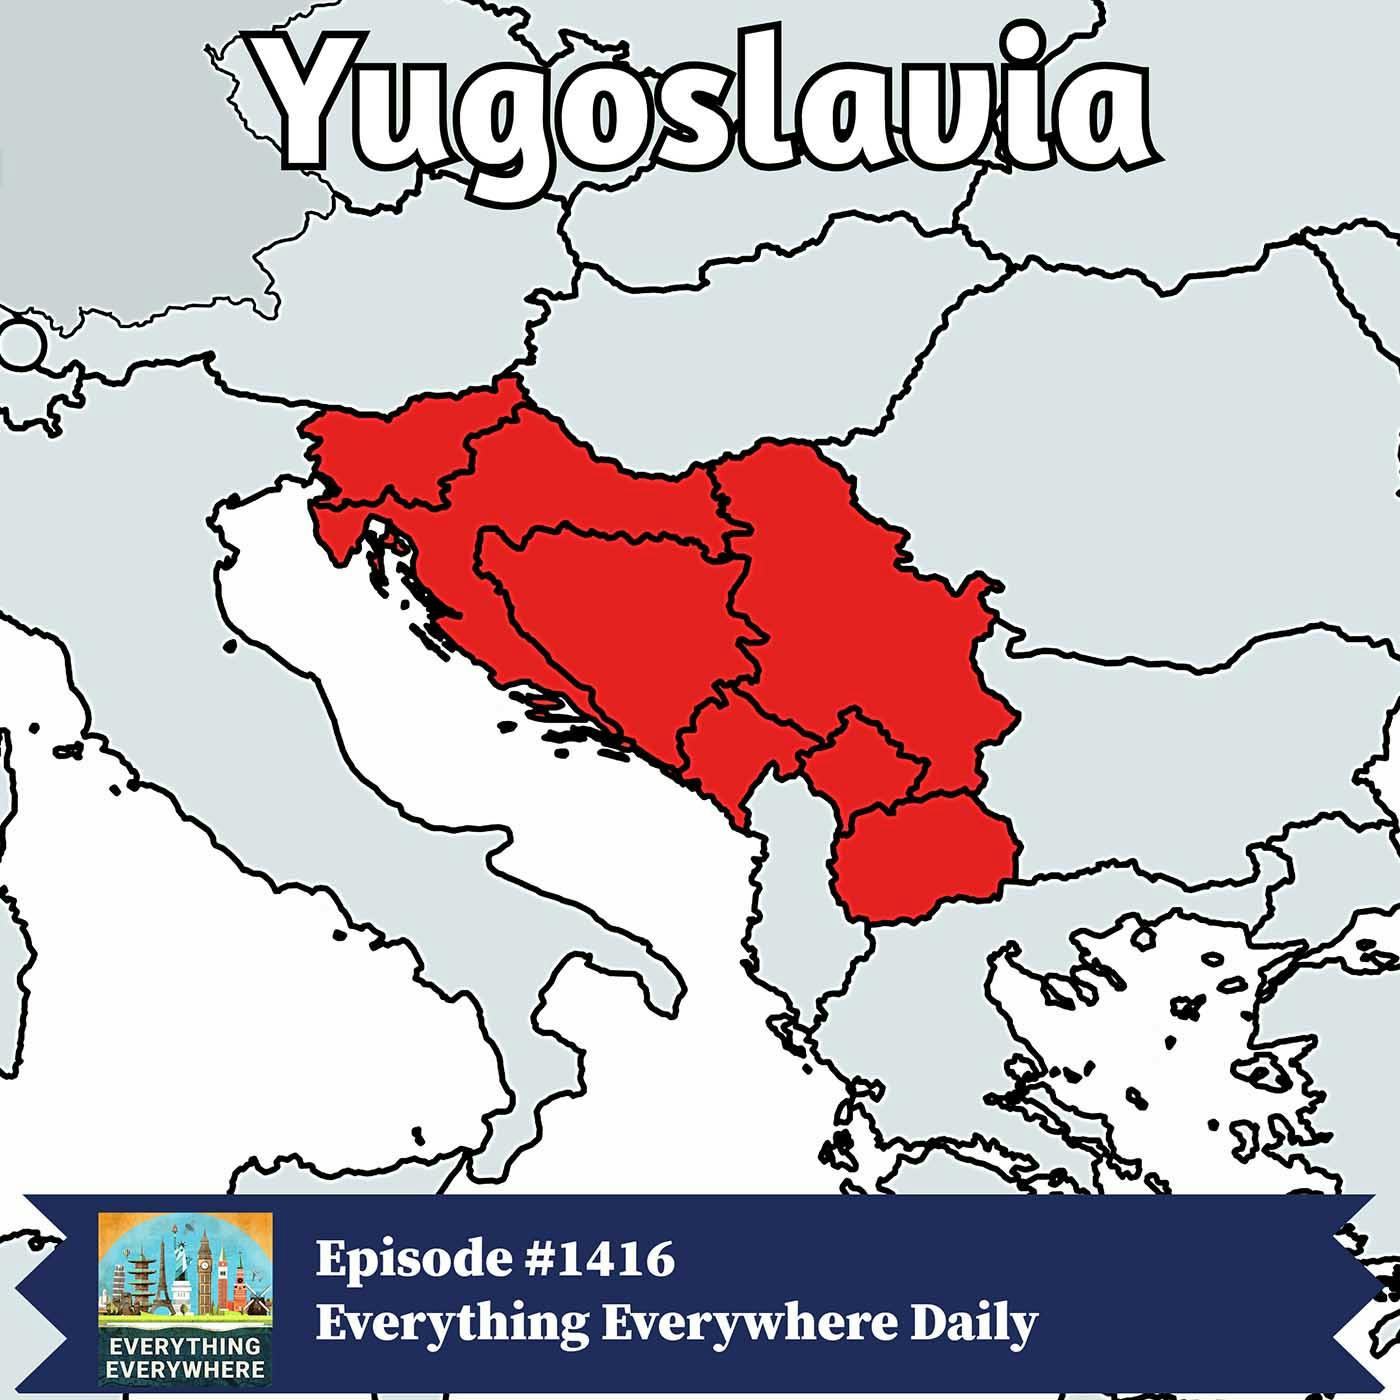 The Rise and Fall of Yugoslavia